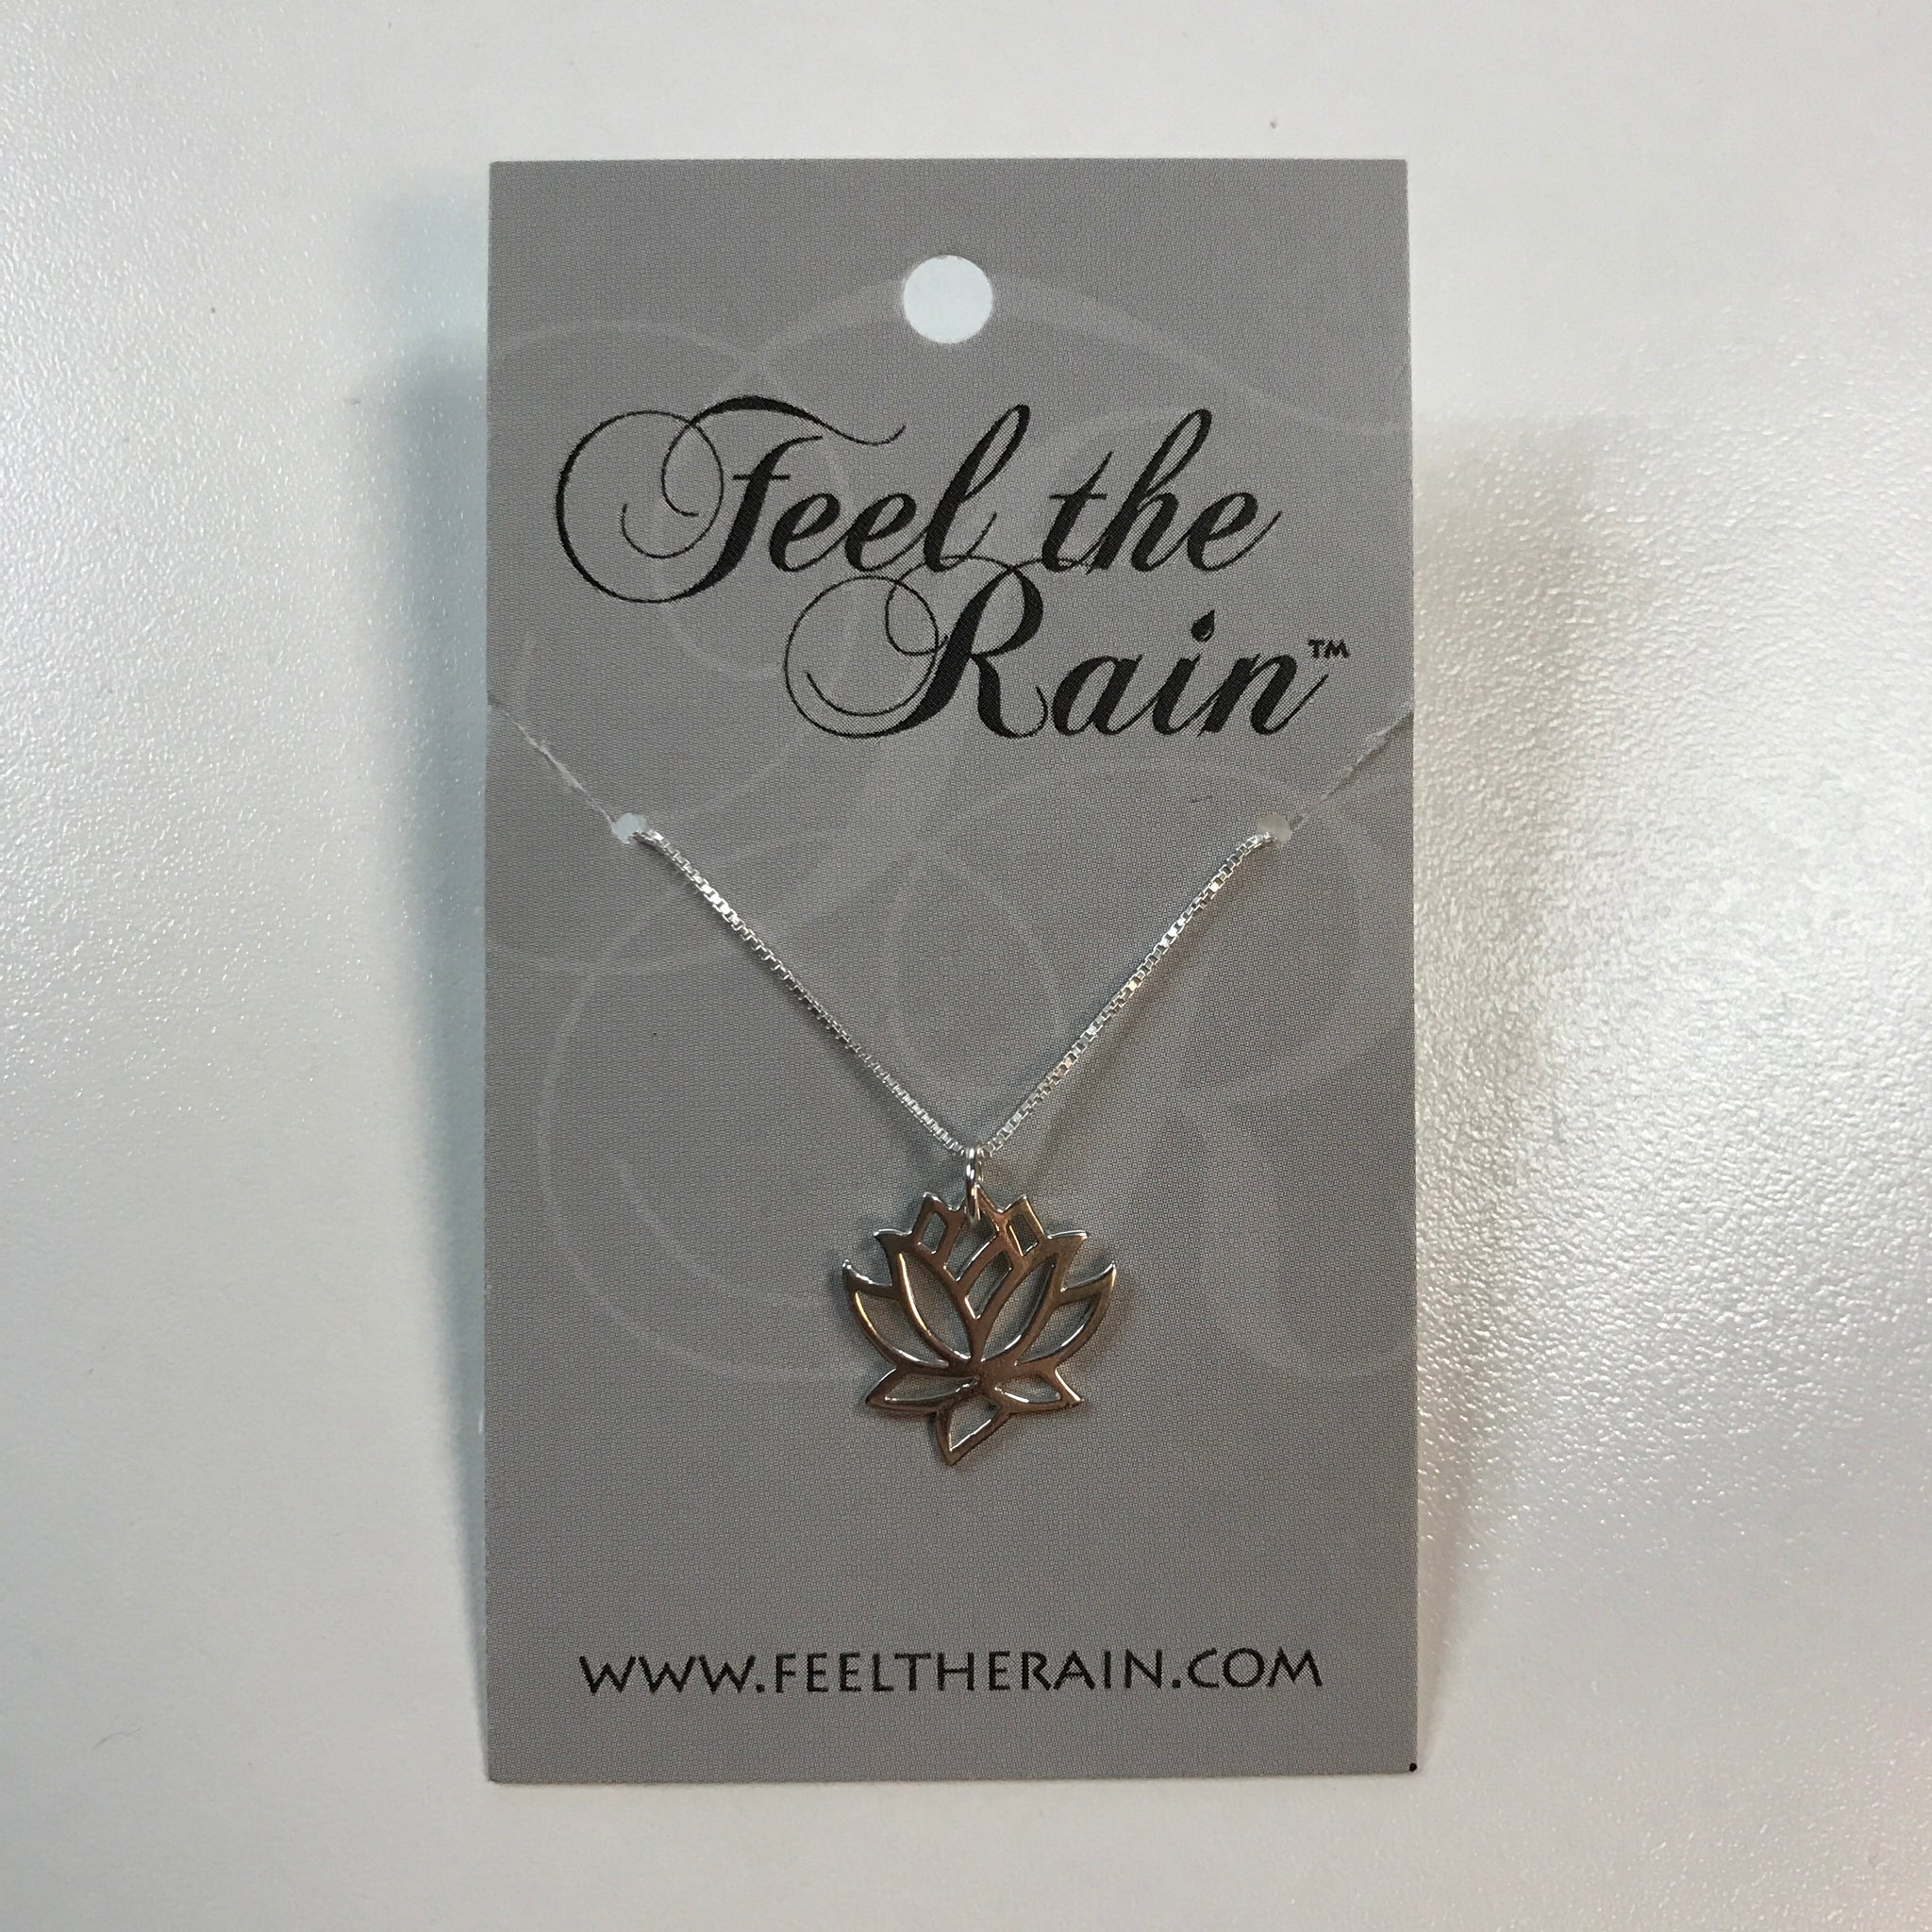 Sterling silver lotus blossom pendant on sterling silver box chain necklace